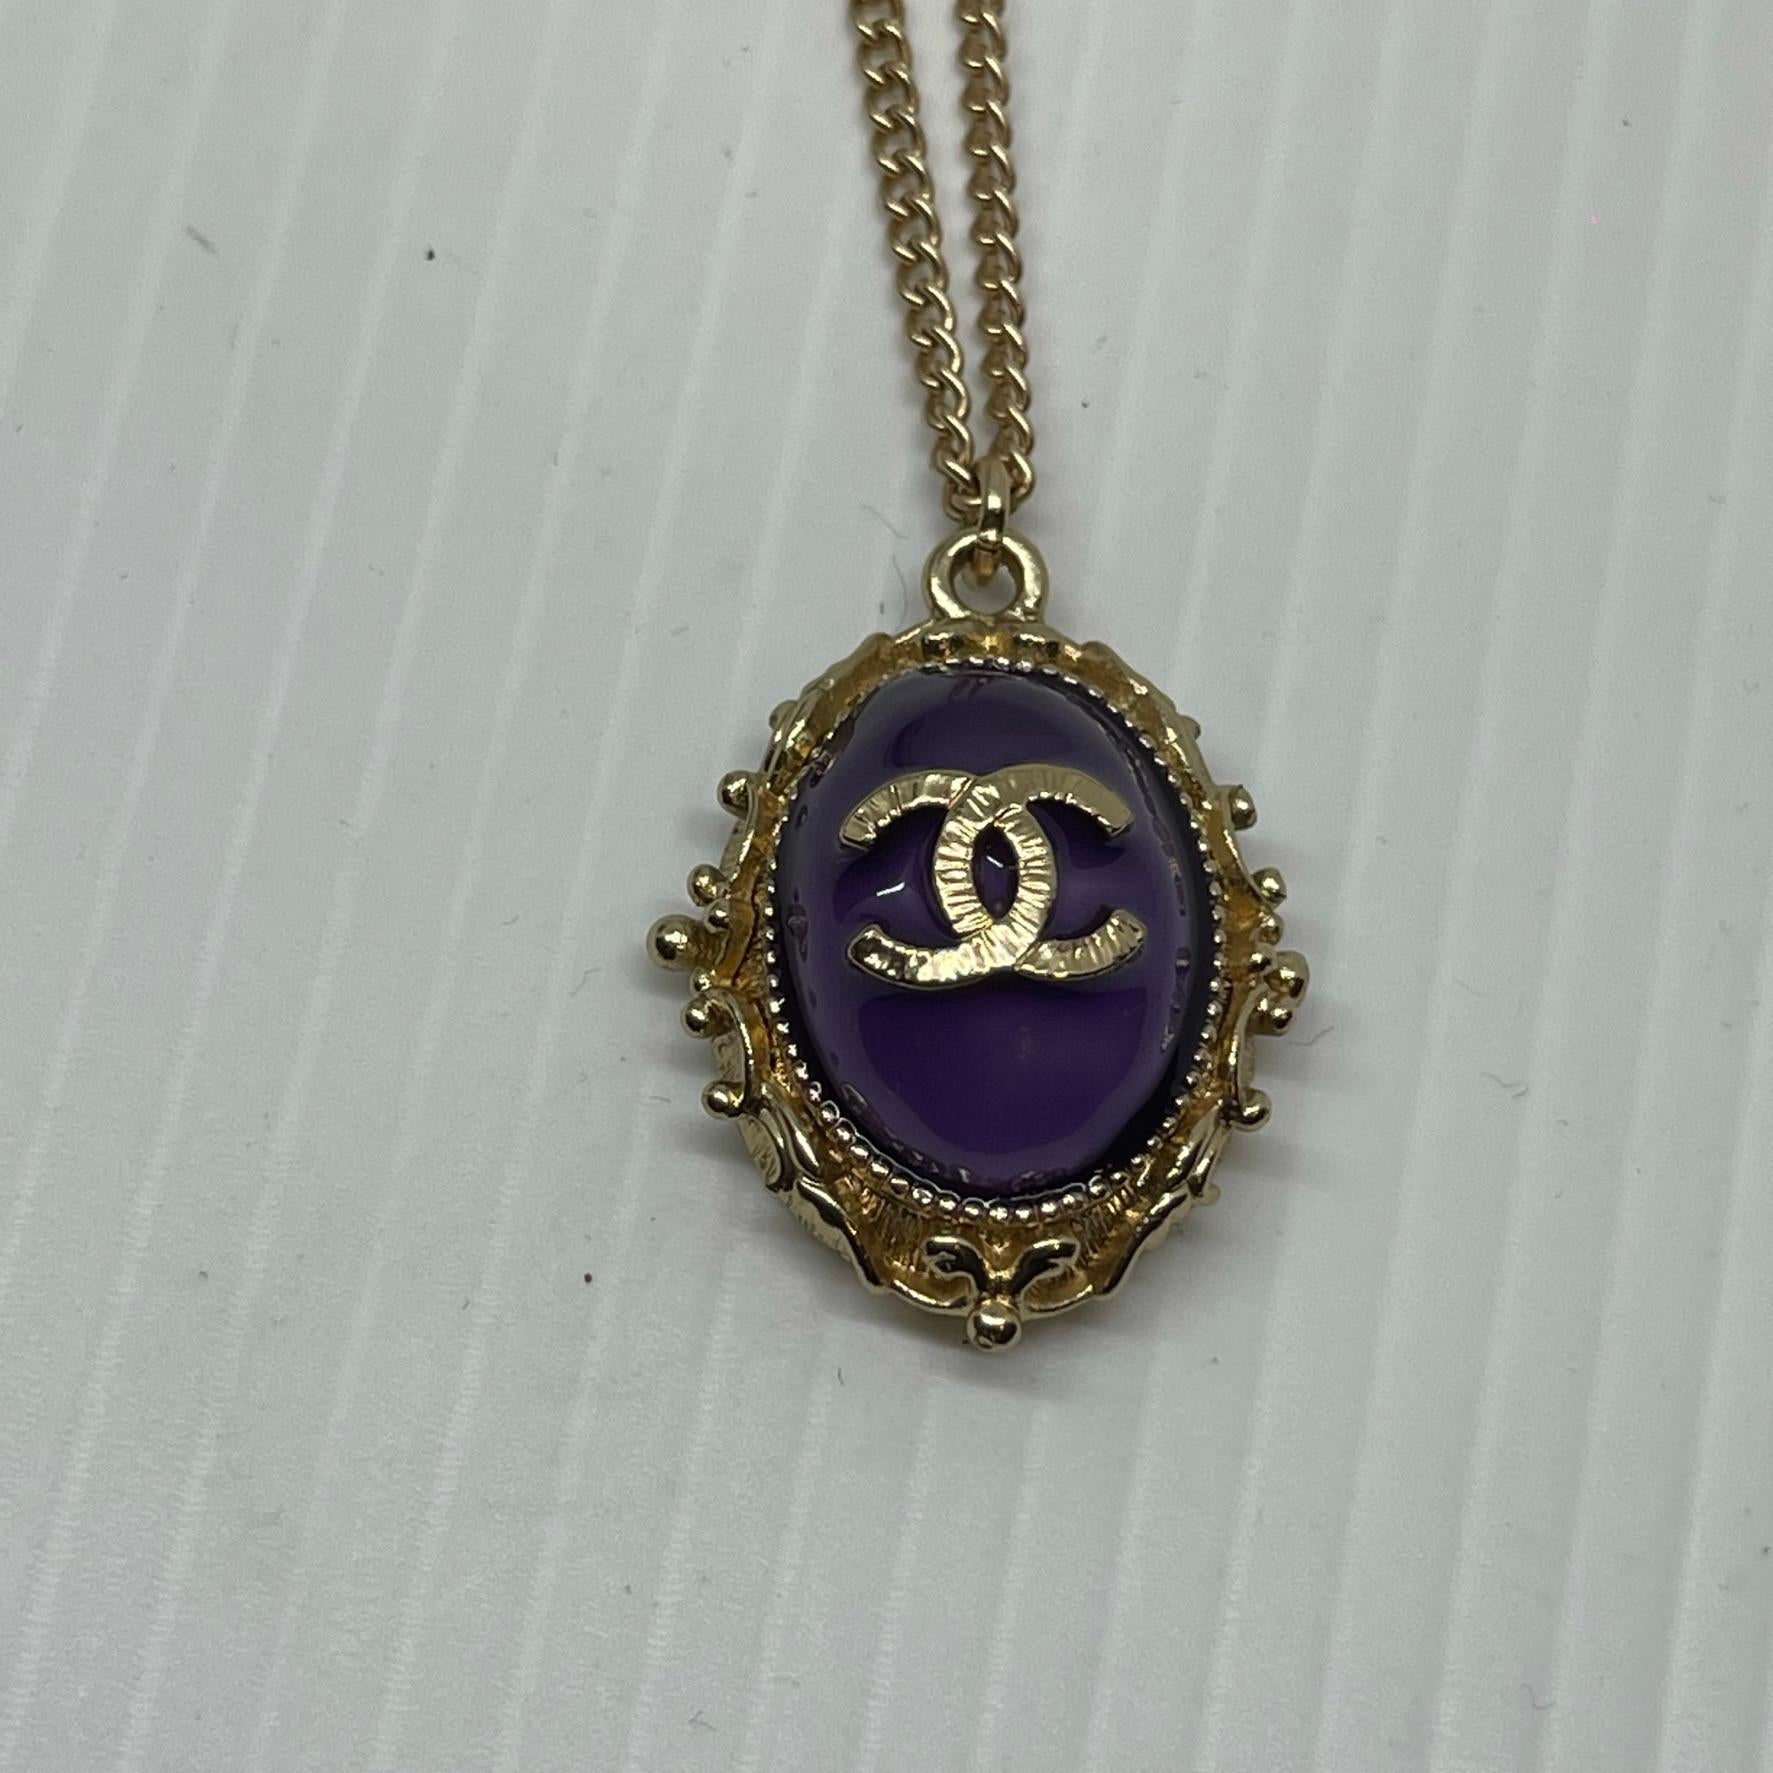 2012 Chanel CC Amethyst Stone Pendant Necklace In Good Condition For Sale In Jakarta, Daerah Khusus Ibukota Jakarta